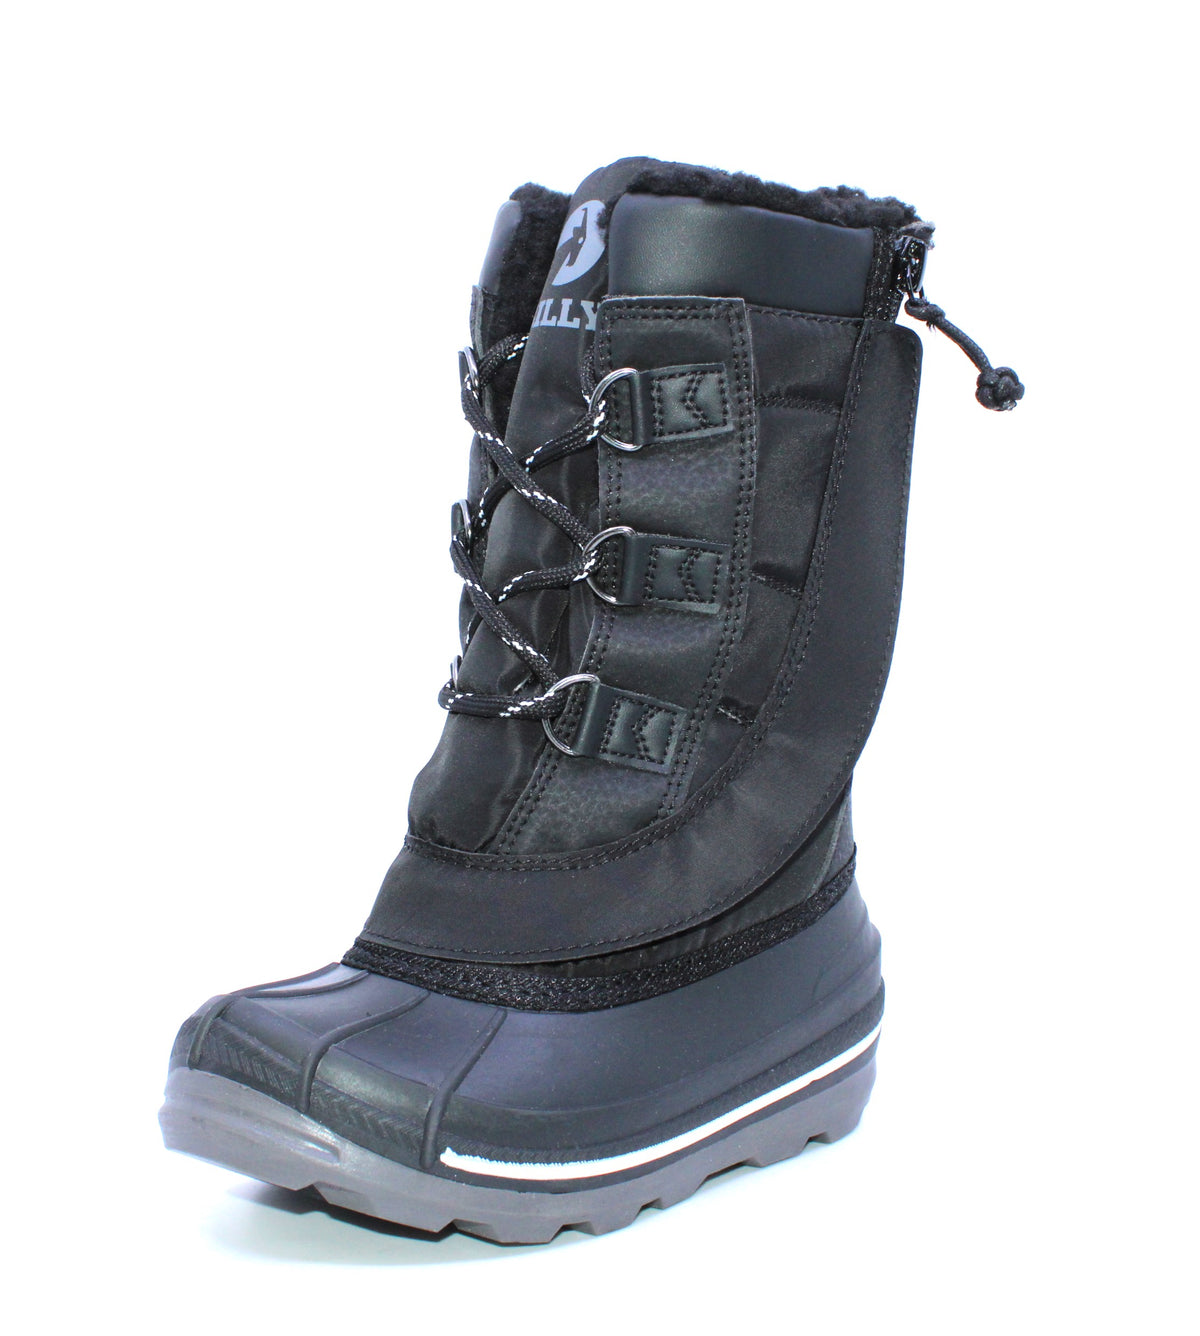 Bottes d'hiver Billy Footwear B22327 Ice II G Unisexe